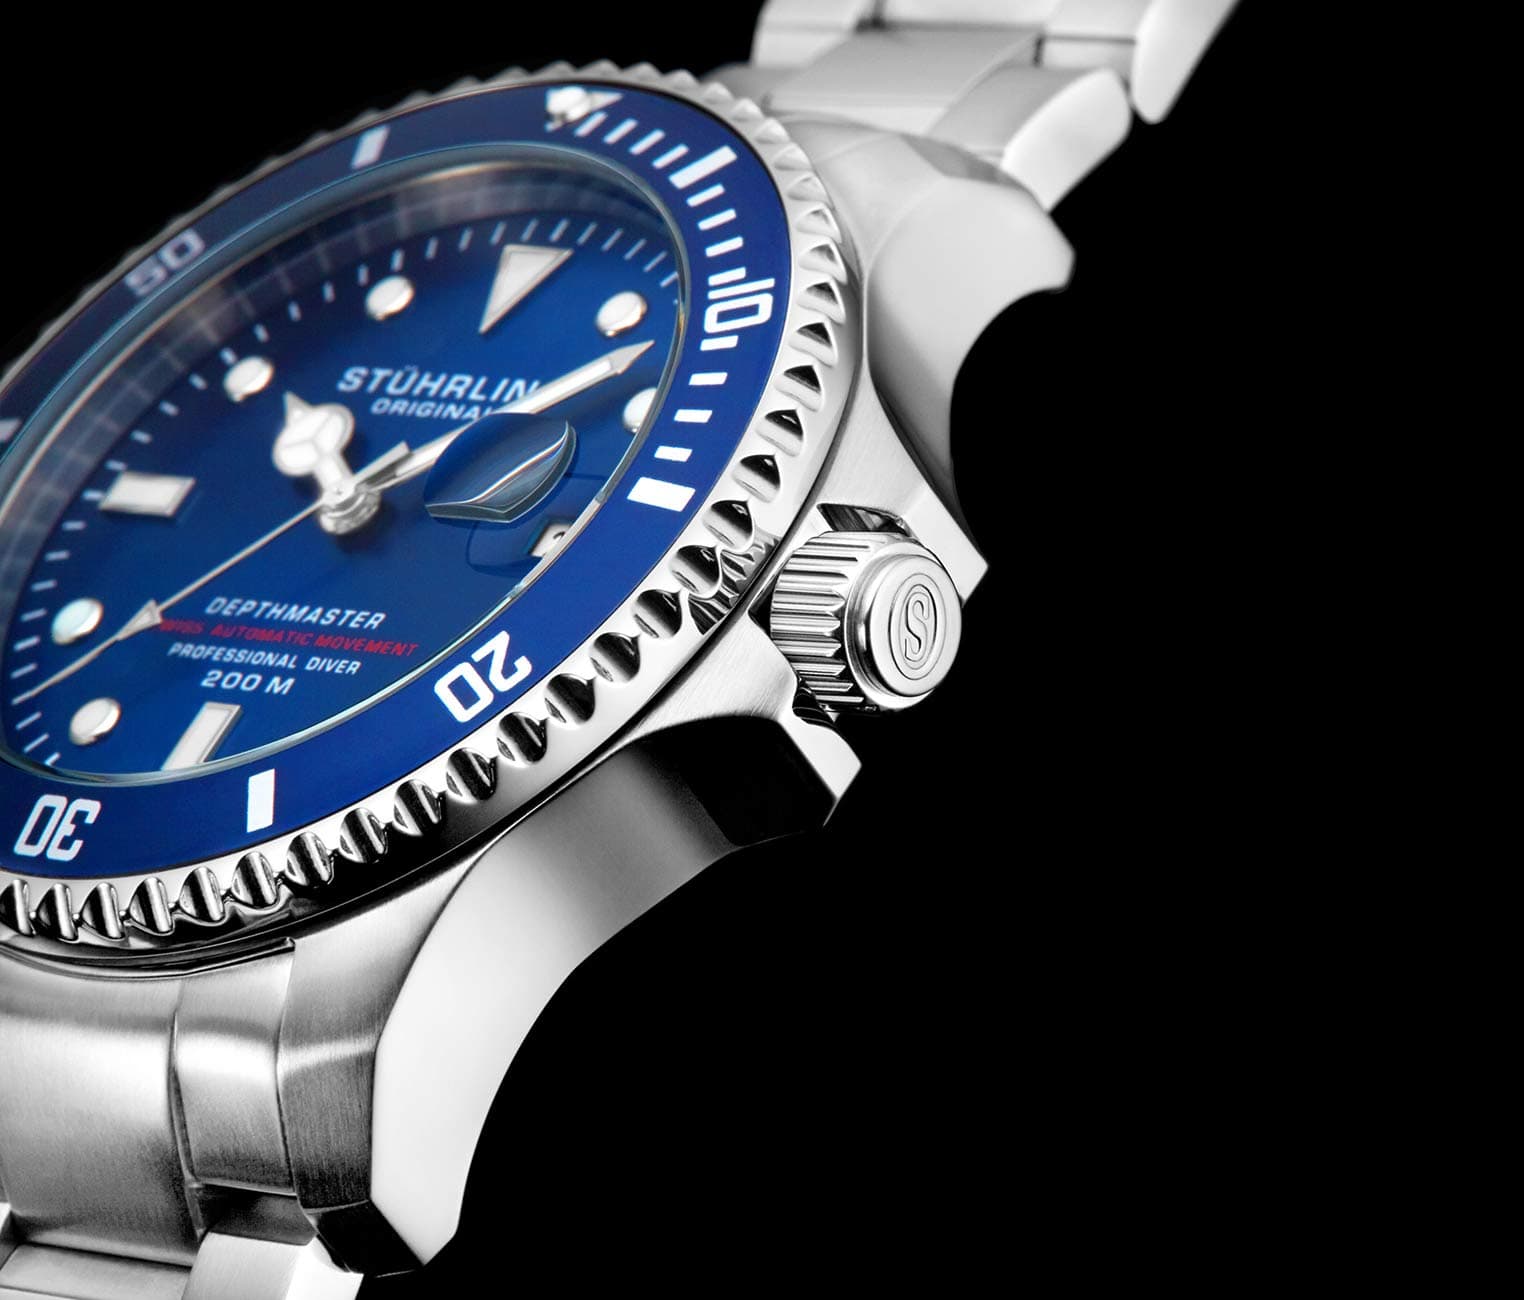 Swiss Automatic Depthmaster 883 42mm Diver